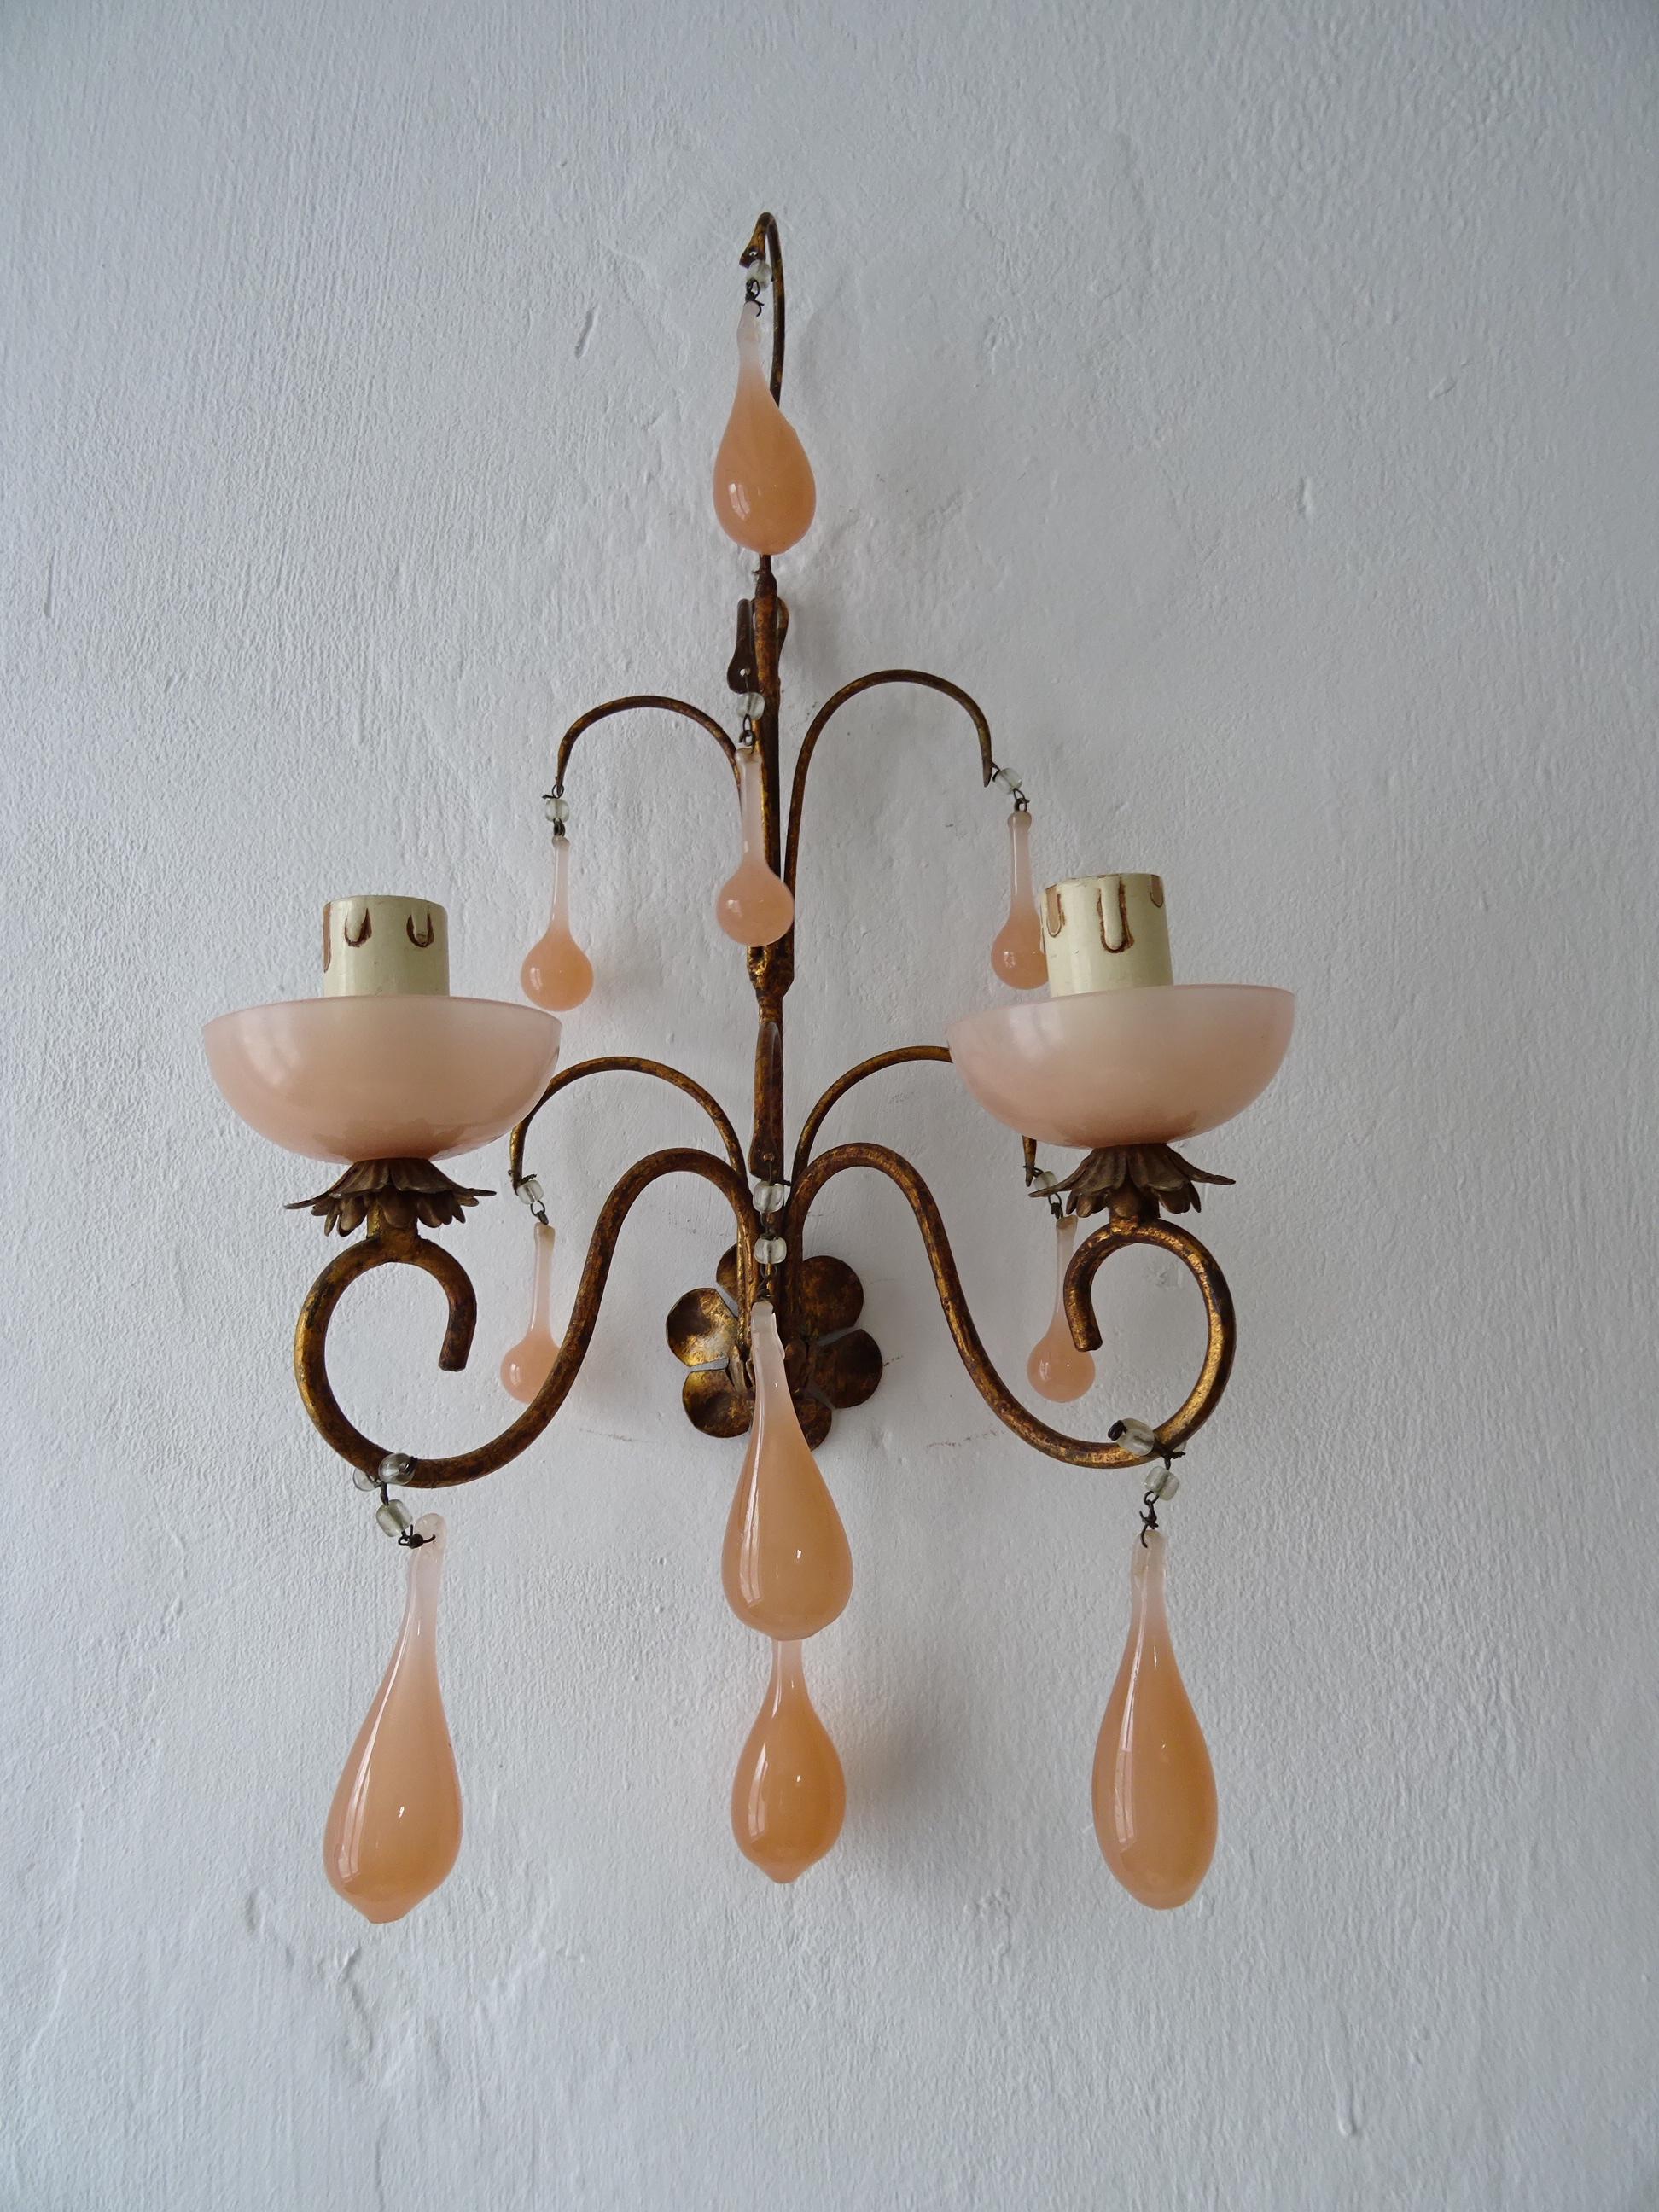 French Pink Opaline Drops & Bobéches Sconces, circa 1920 For Sale 2